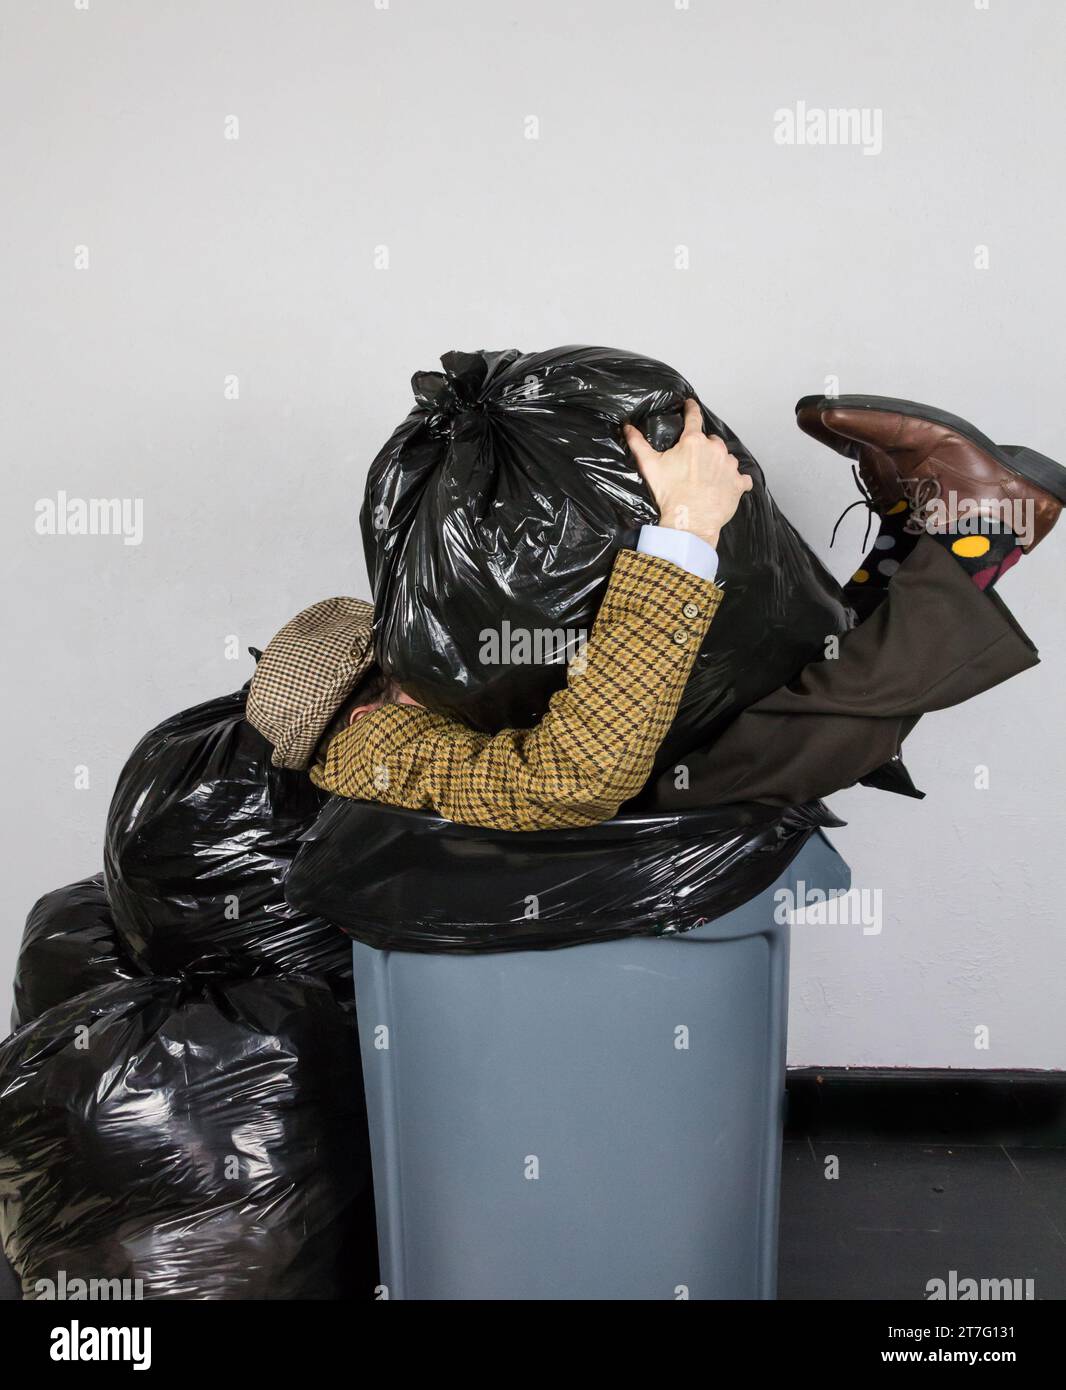 Portrait of Man in Suit and Hat and Polk-A-Dot Socks Stuffed in a Garbage Can Surrounded by Trash Bags. Concept of Businessman Thrown Away. Stock Photo